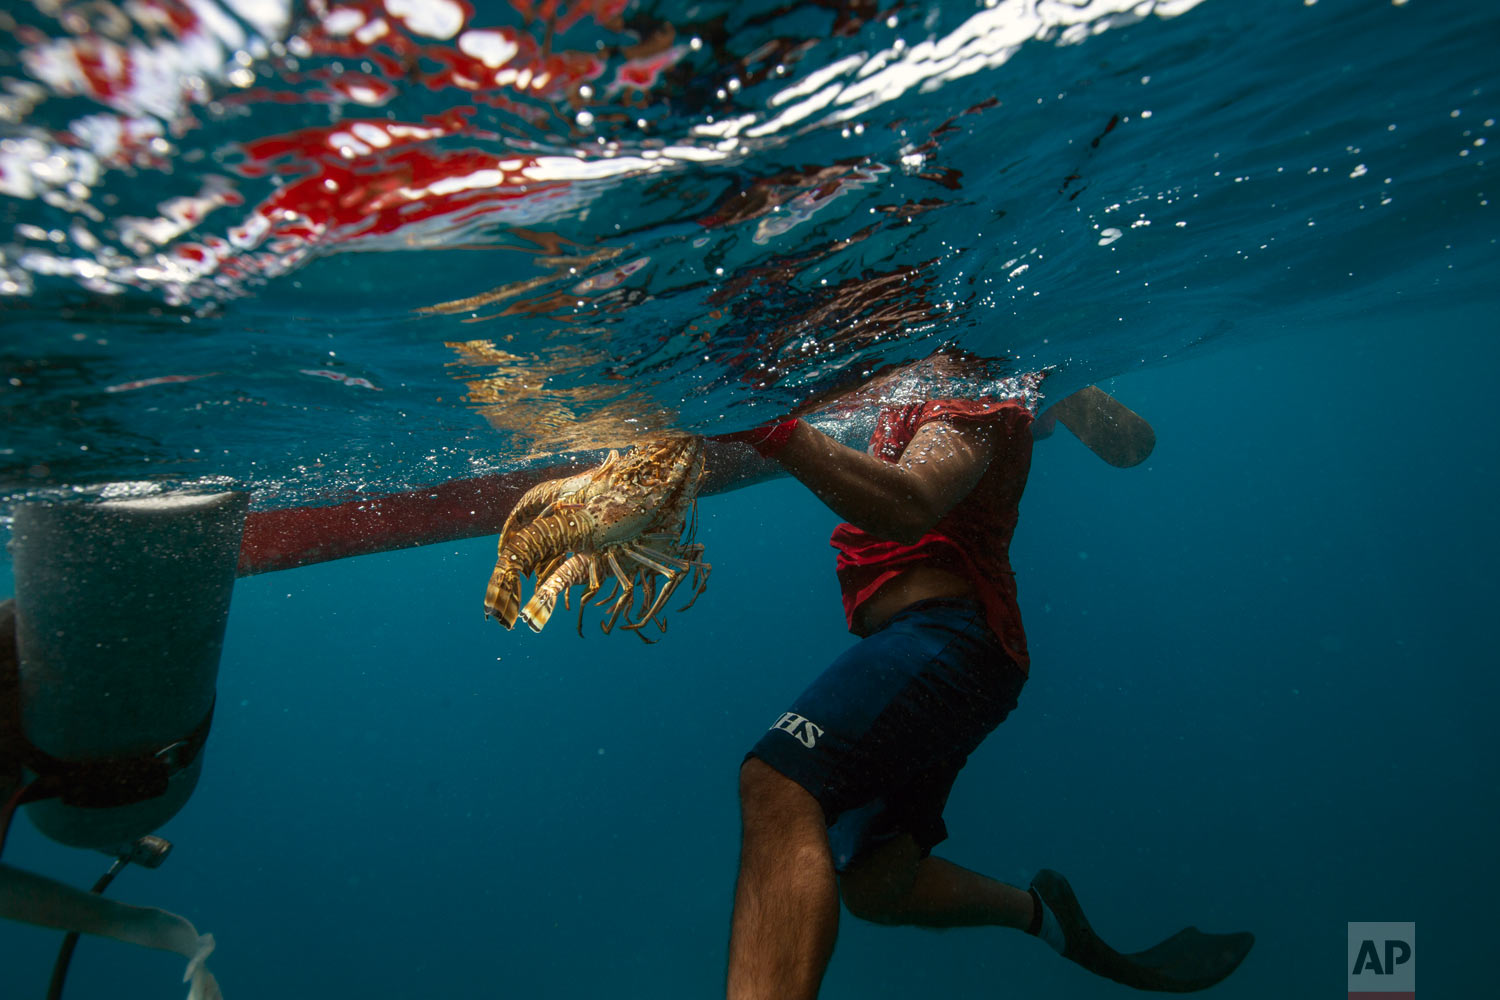  In this Sept. 9, 2018 photo, a diver holds on to his catch of lobsters during a fishing journey in the Miskito coast near Cay Savannah, Honduras. (AP Photo/Rodrigo Abd) 